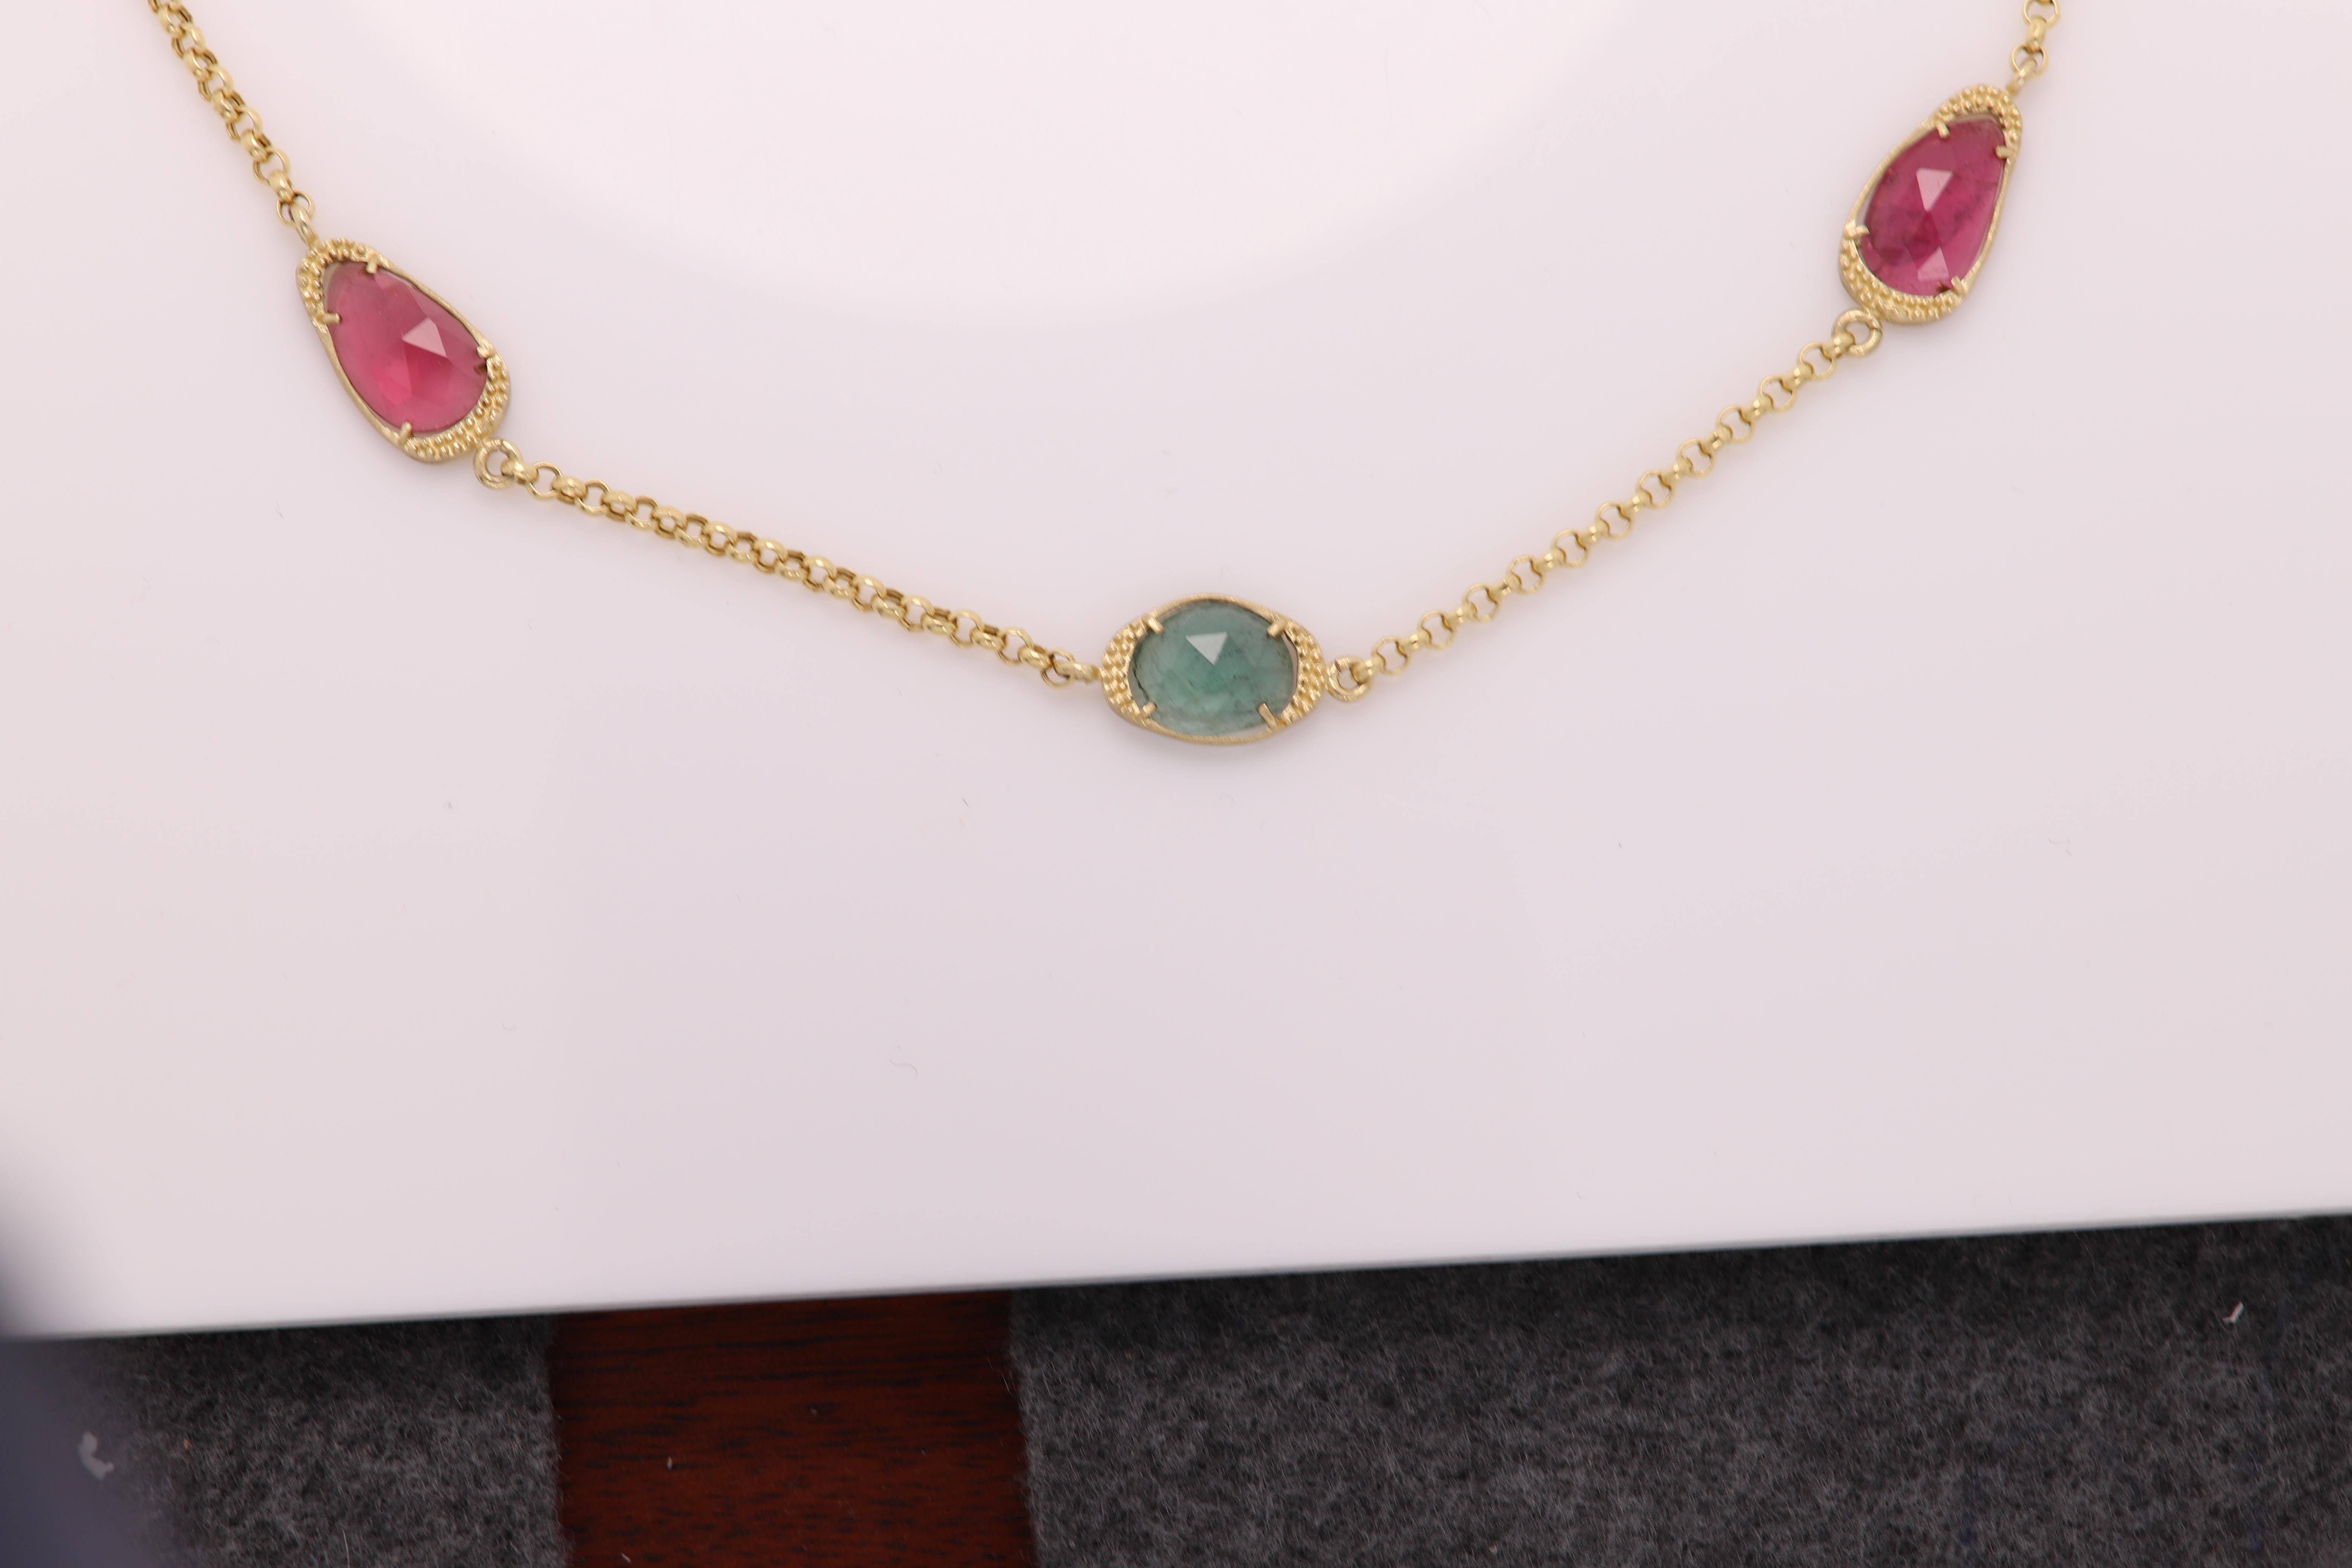 Vintage - made in Italy
Elegant tourmaline Gemstone necklace
linked with classic type of Chain
14k Yellow Gold 9.30 Grams
Necklace length: 18' Inch
Natural Tourmaline red, green and brown- sliced type cut
+ Gift box and appraisal
Made around 20